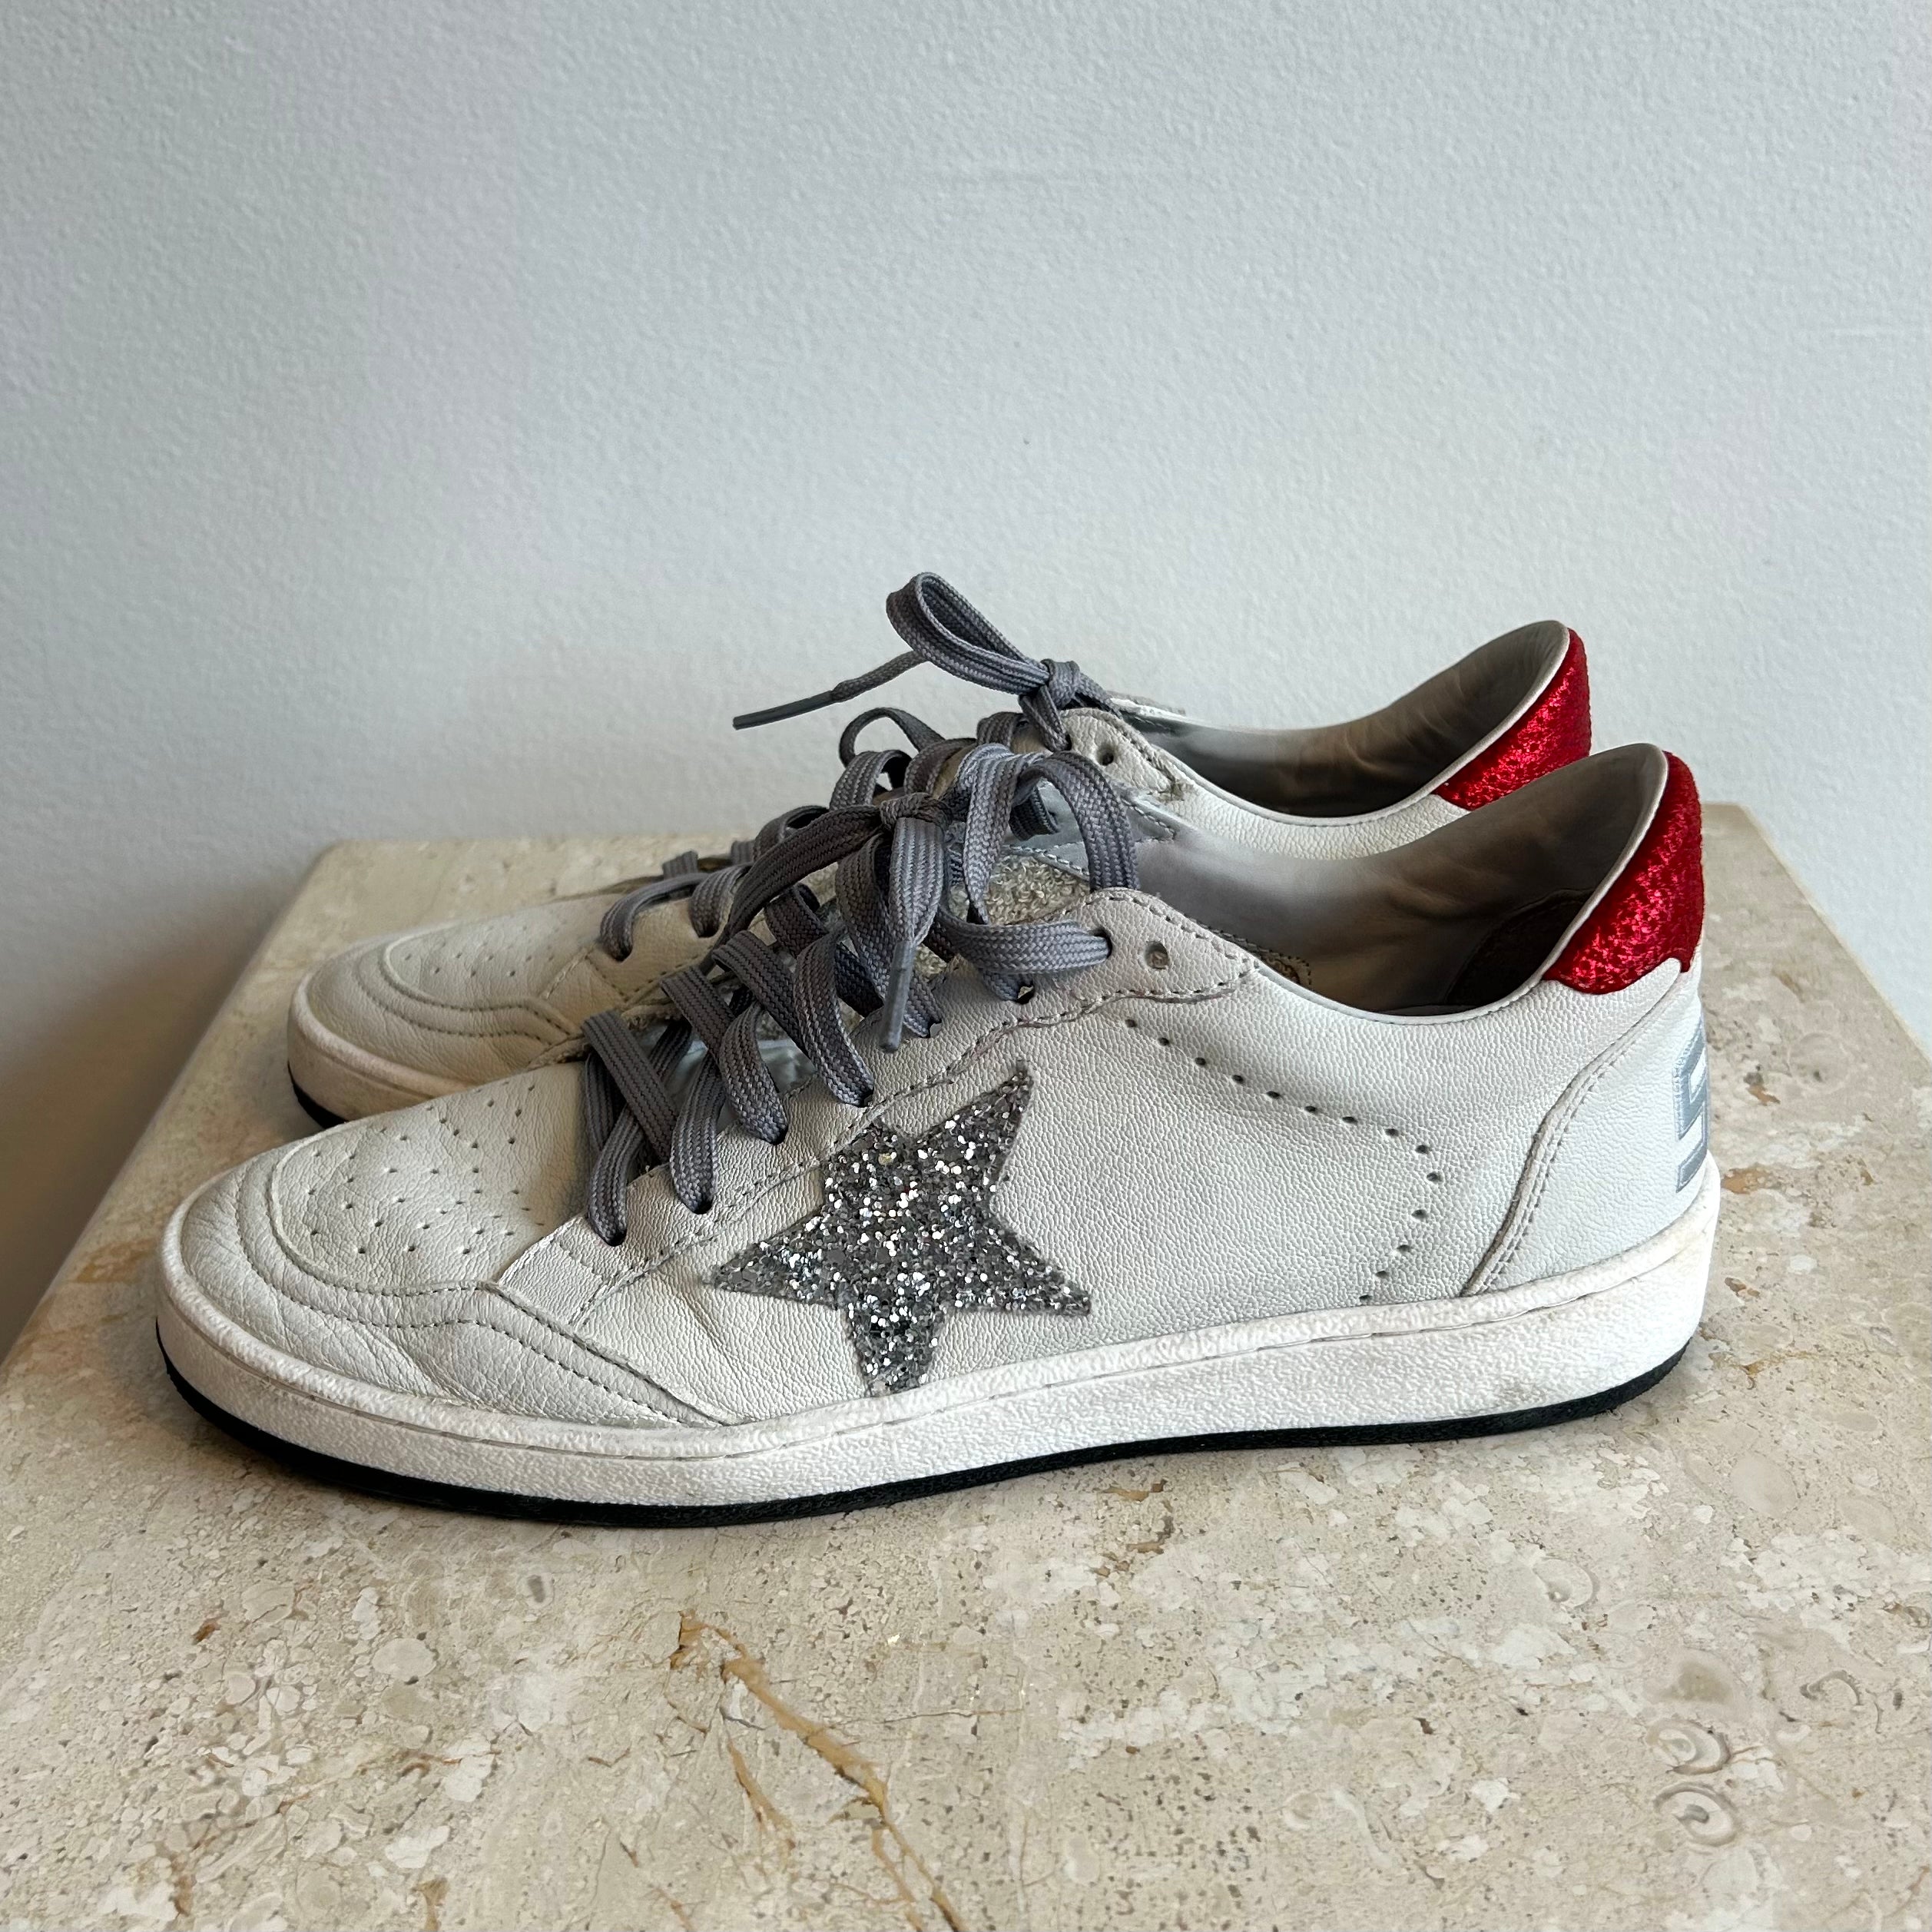 Pre-Owned GOLDEN GOOSE GGDB Ball Star Low Top Sneaker - Size 38